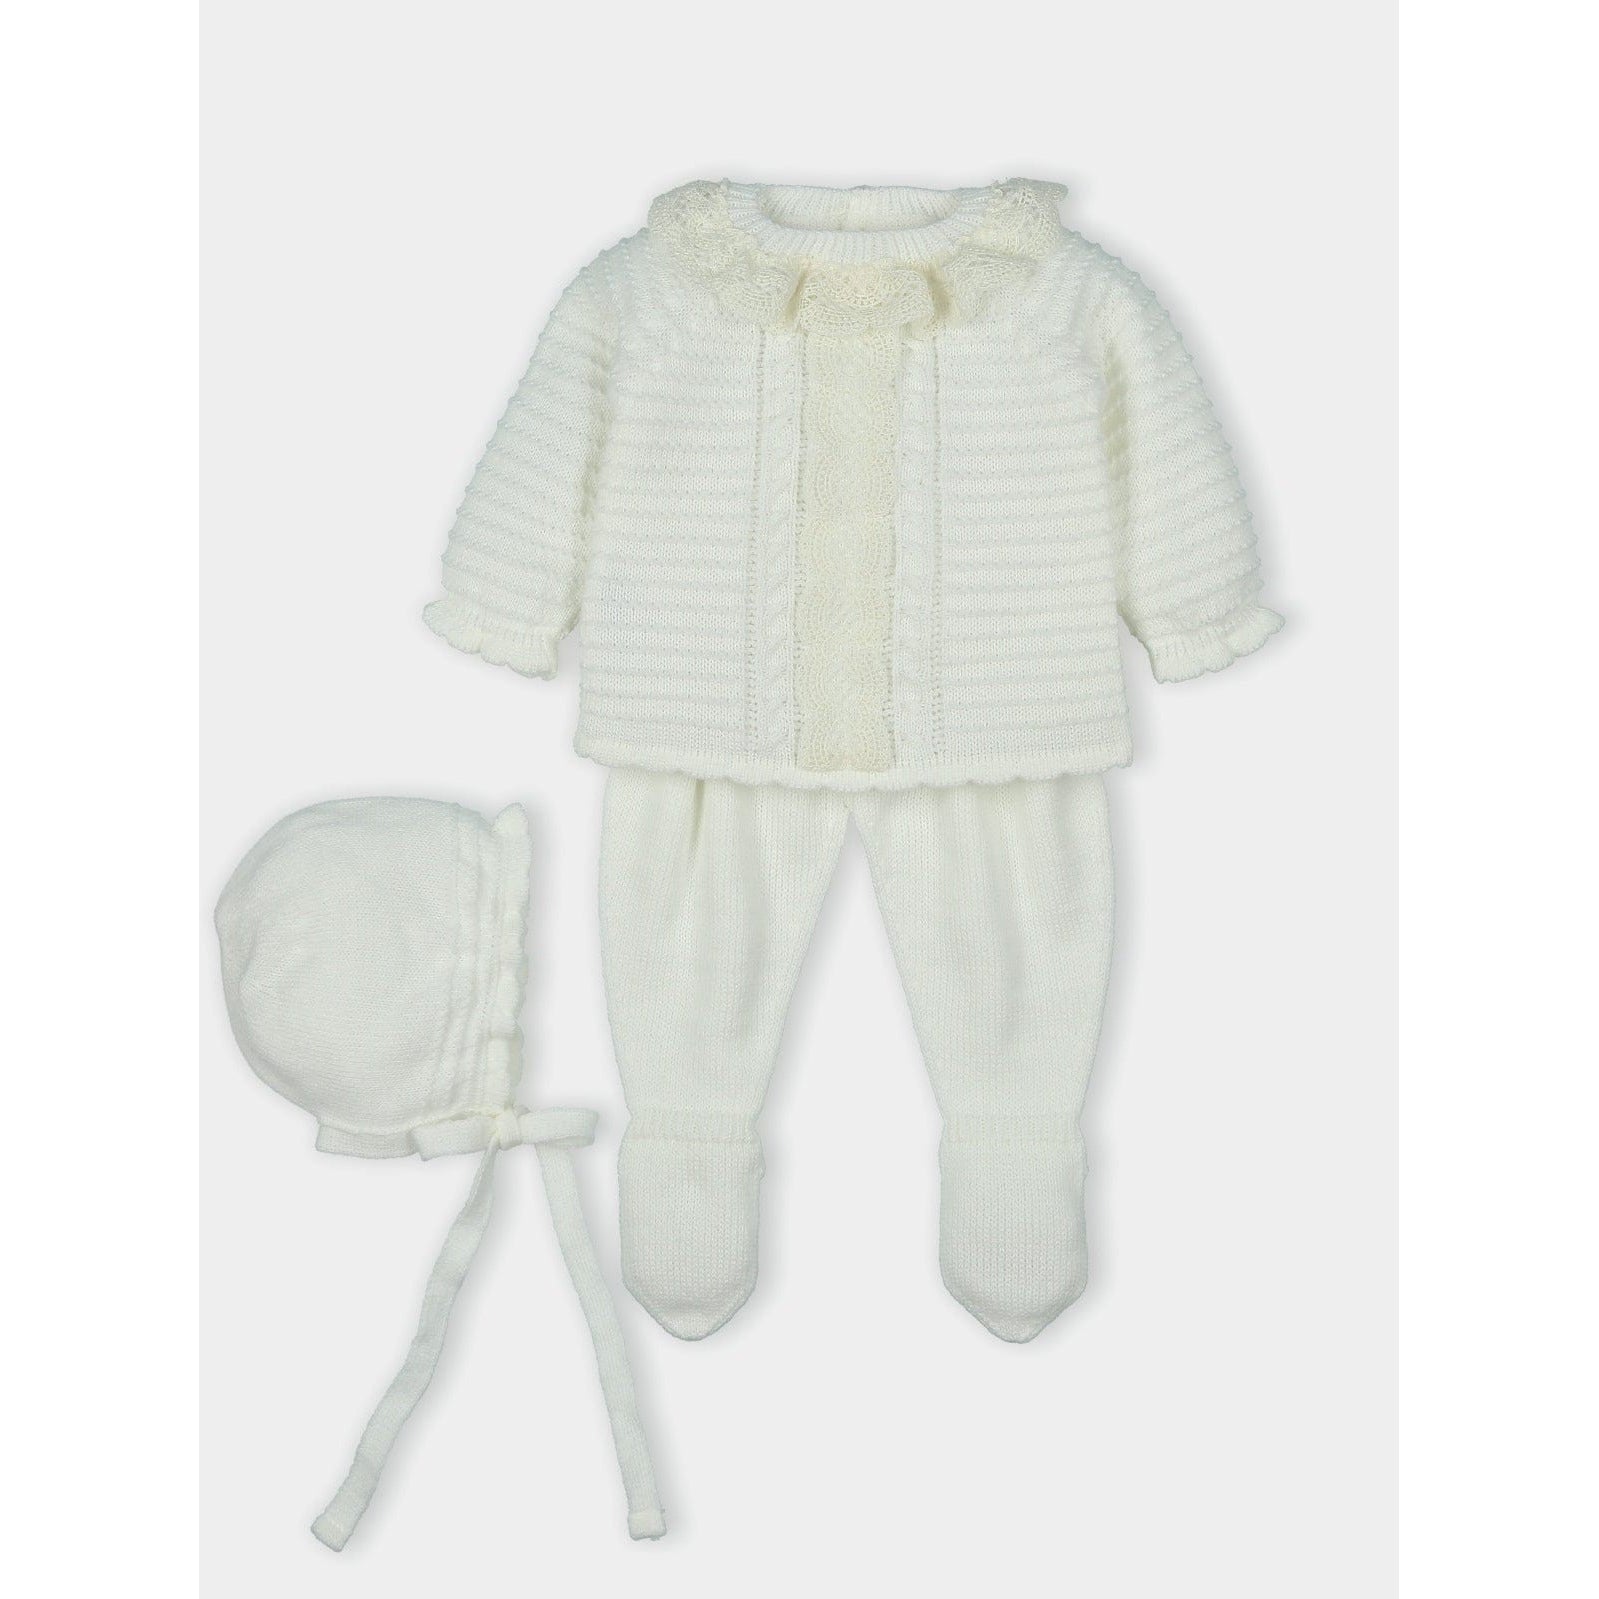 Mac Ilusion Tops & Leggings 3m Mac Ilusion Baby Girls Crude Three Pieces Knitted Sweater & Leggings Outfit